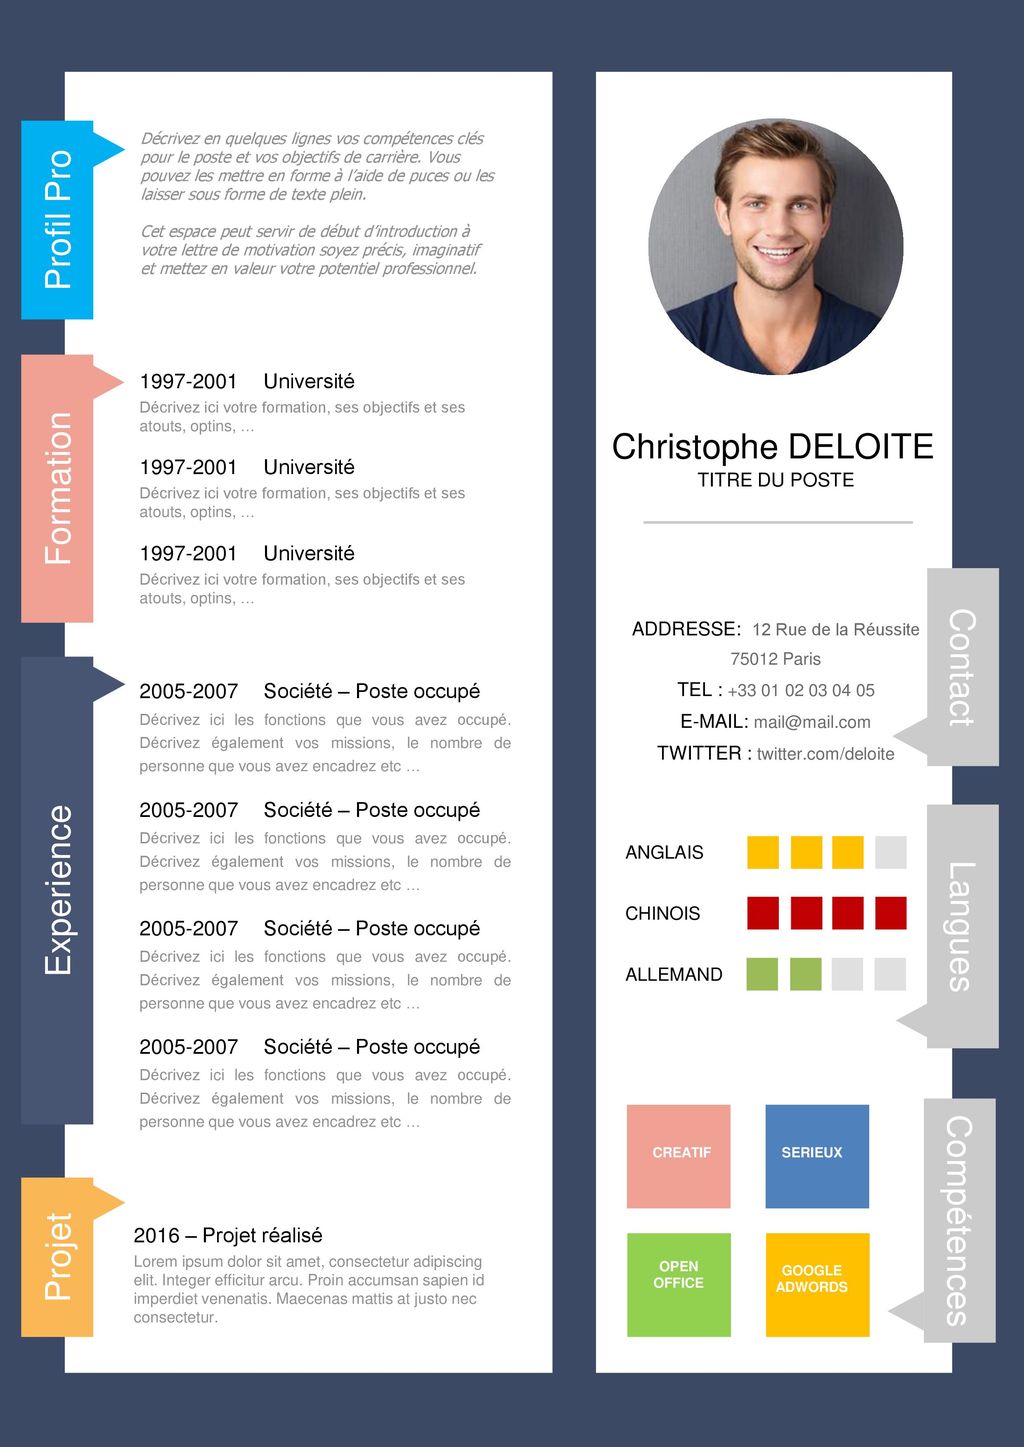 Profil Pro Christophe DELOITE Formation Contact Experience Langues